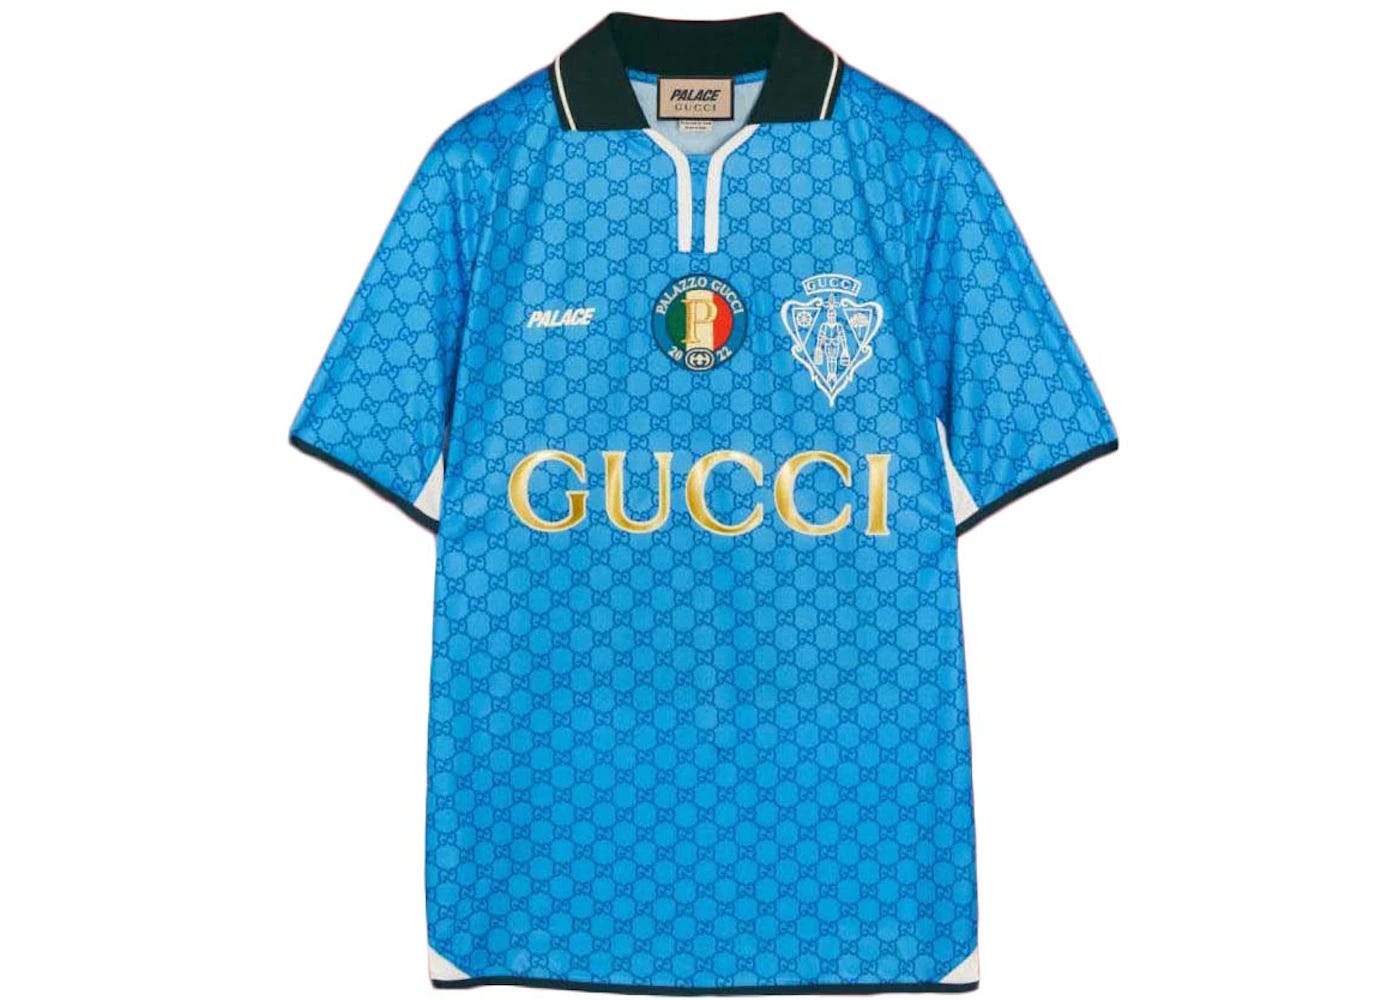 Palace x Gucci Printed All-Over GG Football Technical Jersey T-Shirt Blue